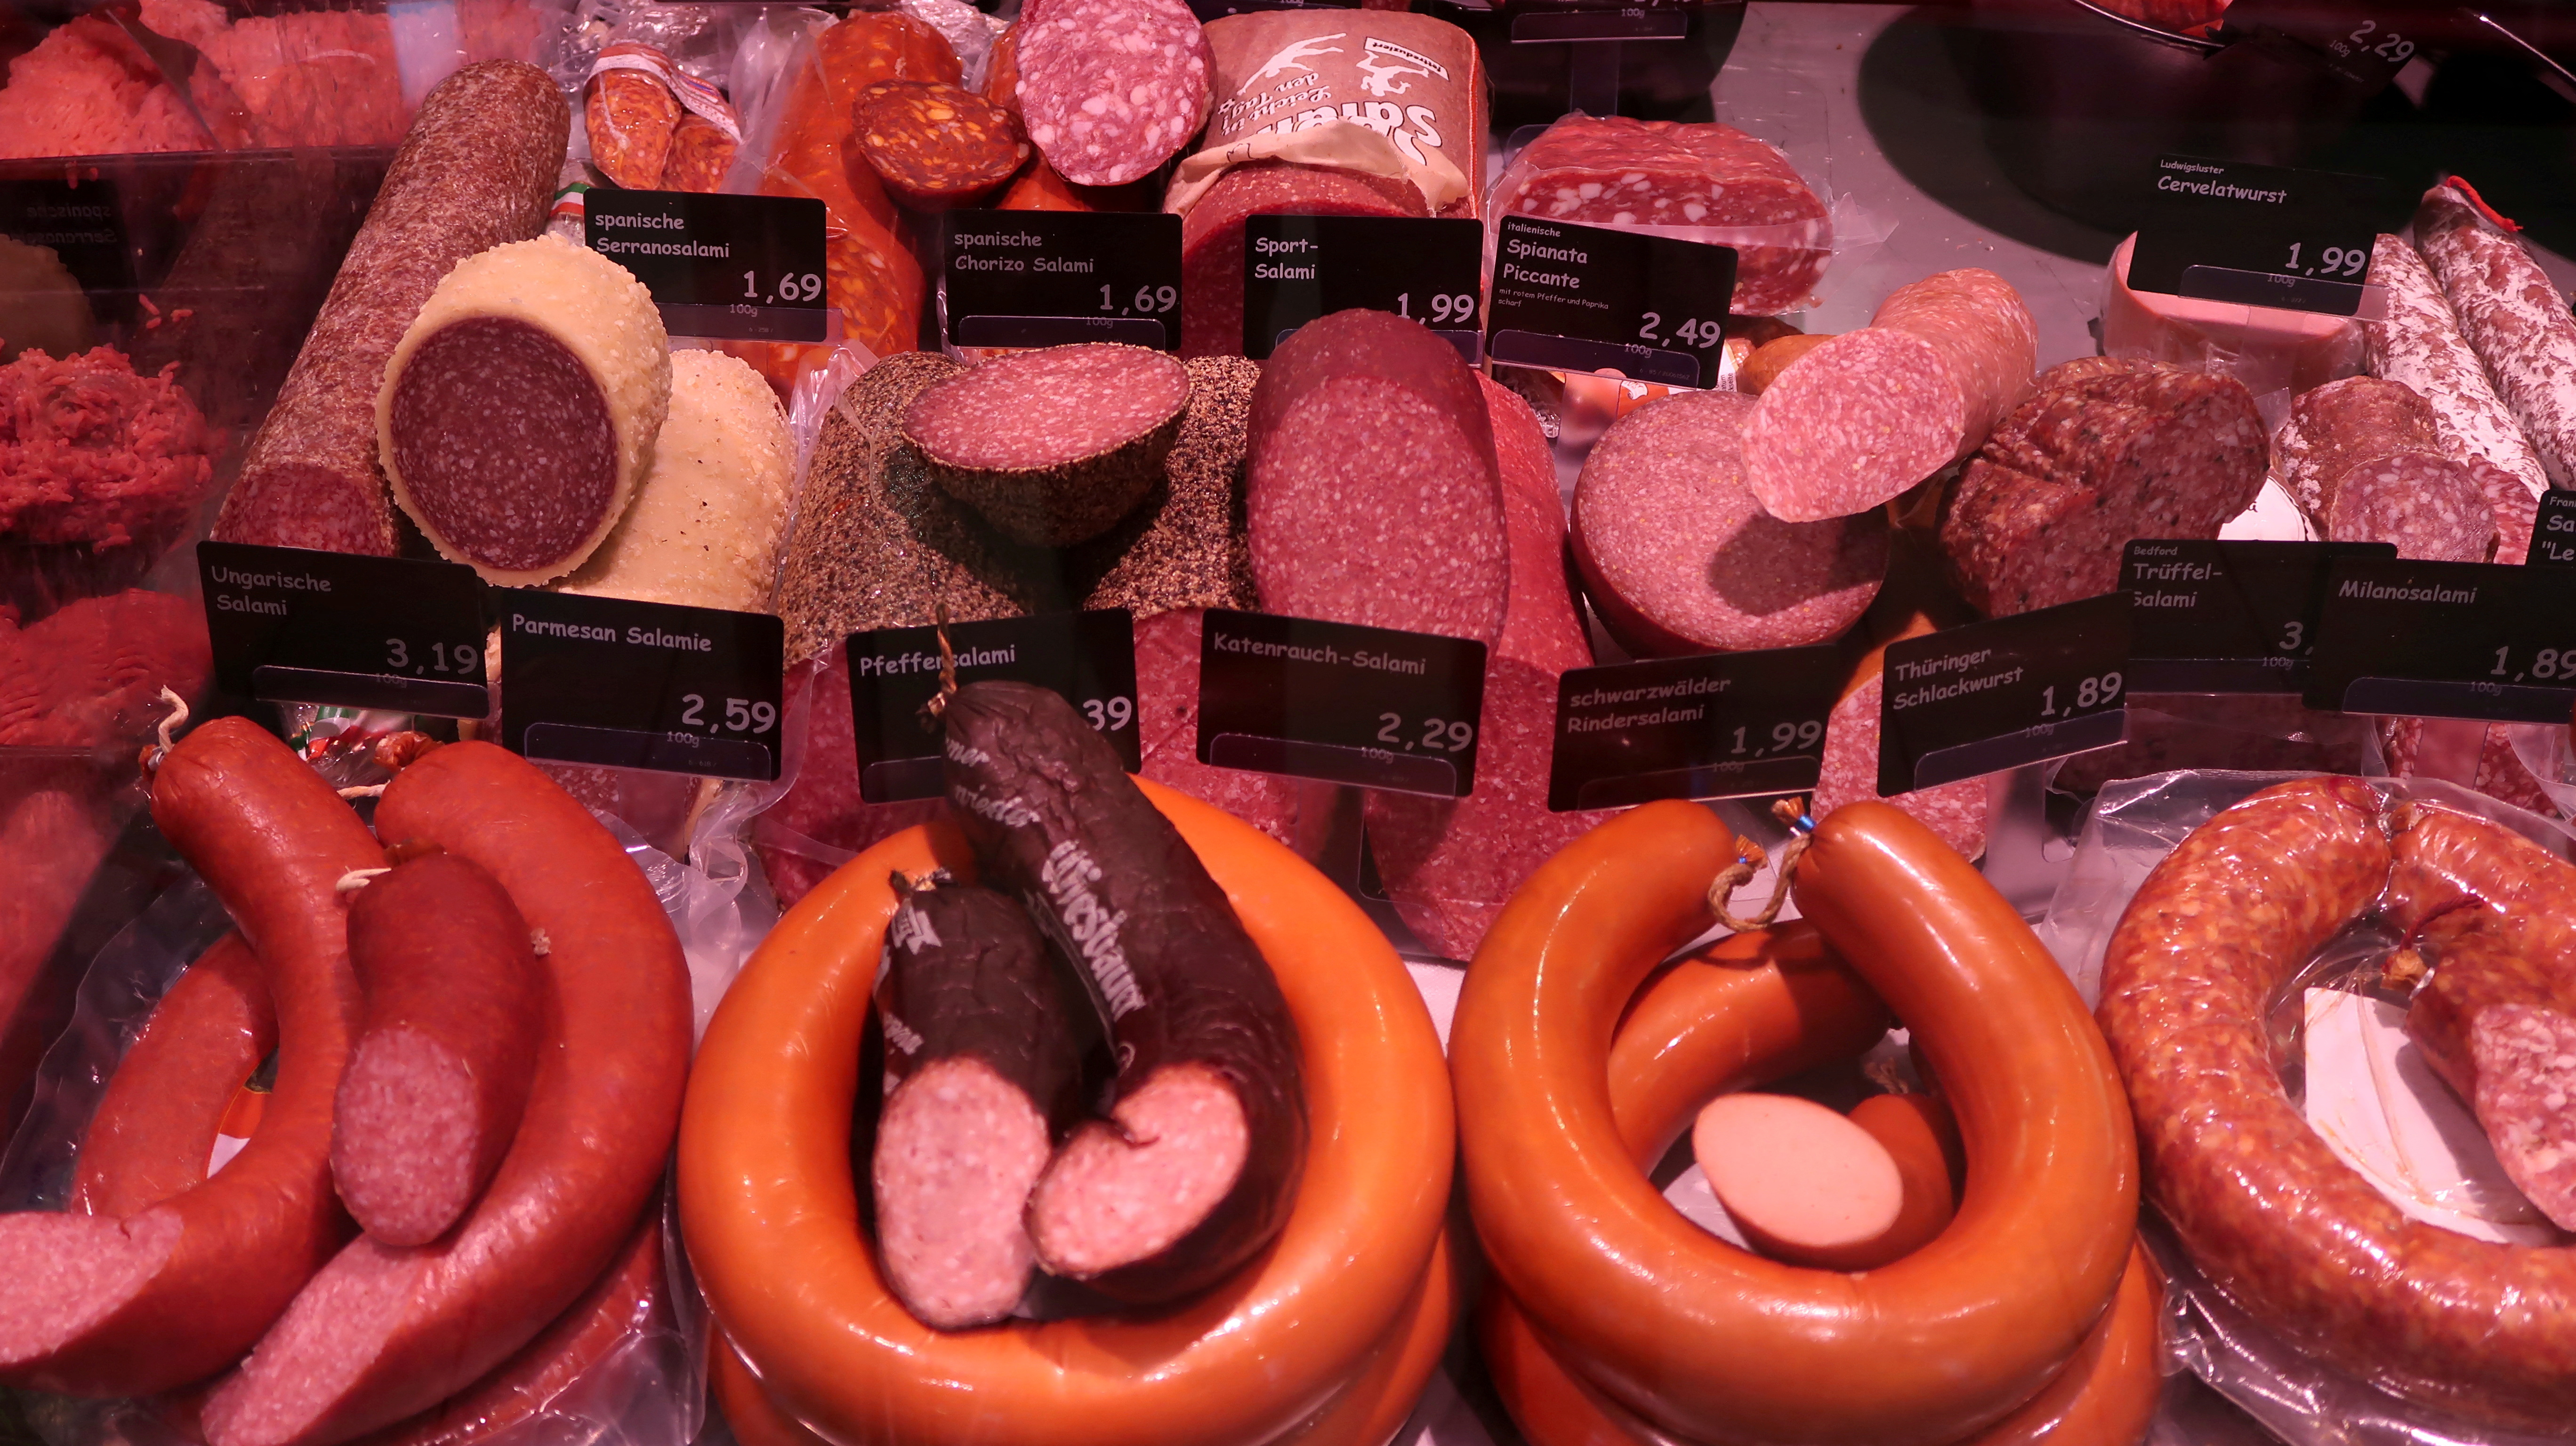 Sausages are displayed in a supermarket in Berlin